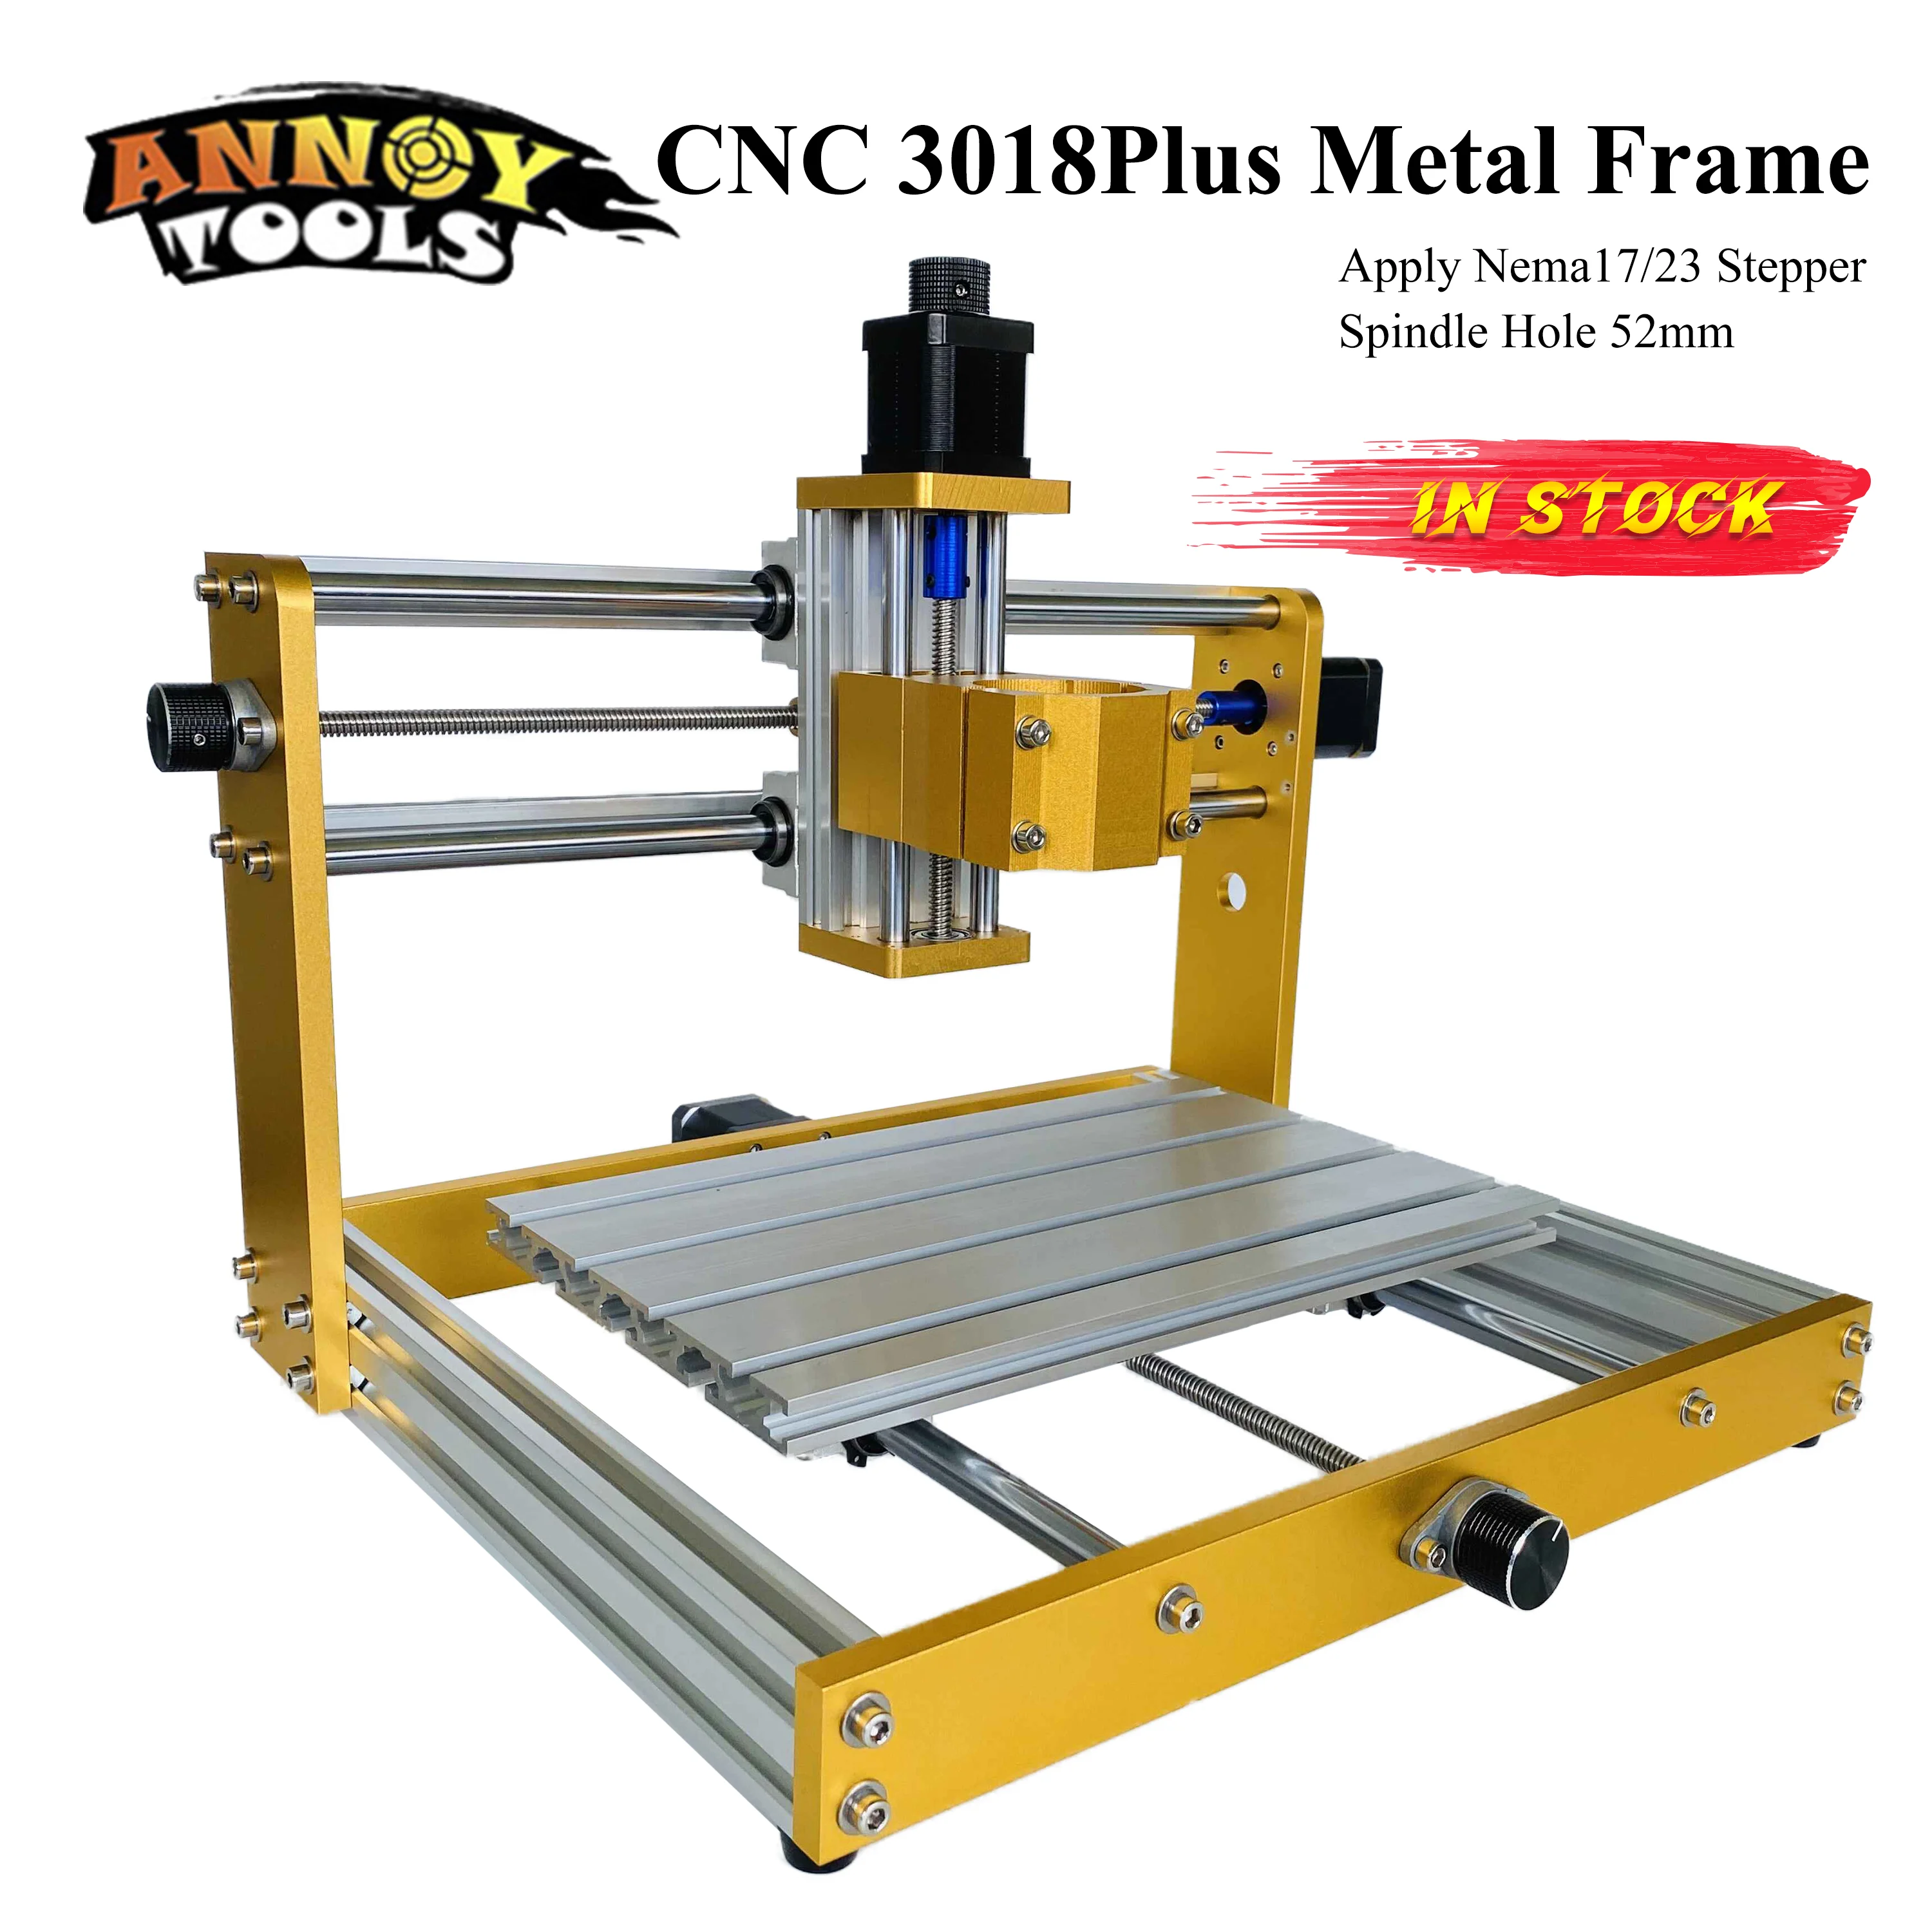 CNC3018plus Metal Frame Apply Nema17/23 Stepper  52mm Spindle CNC Wood Router,Pcb Milling Machine,Craved On Metal